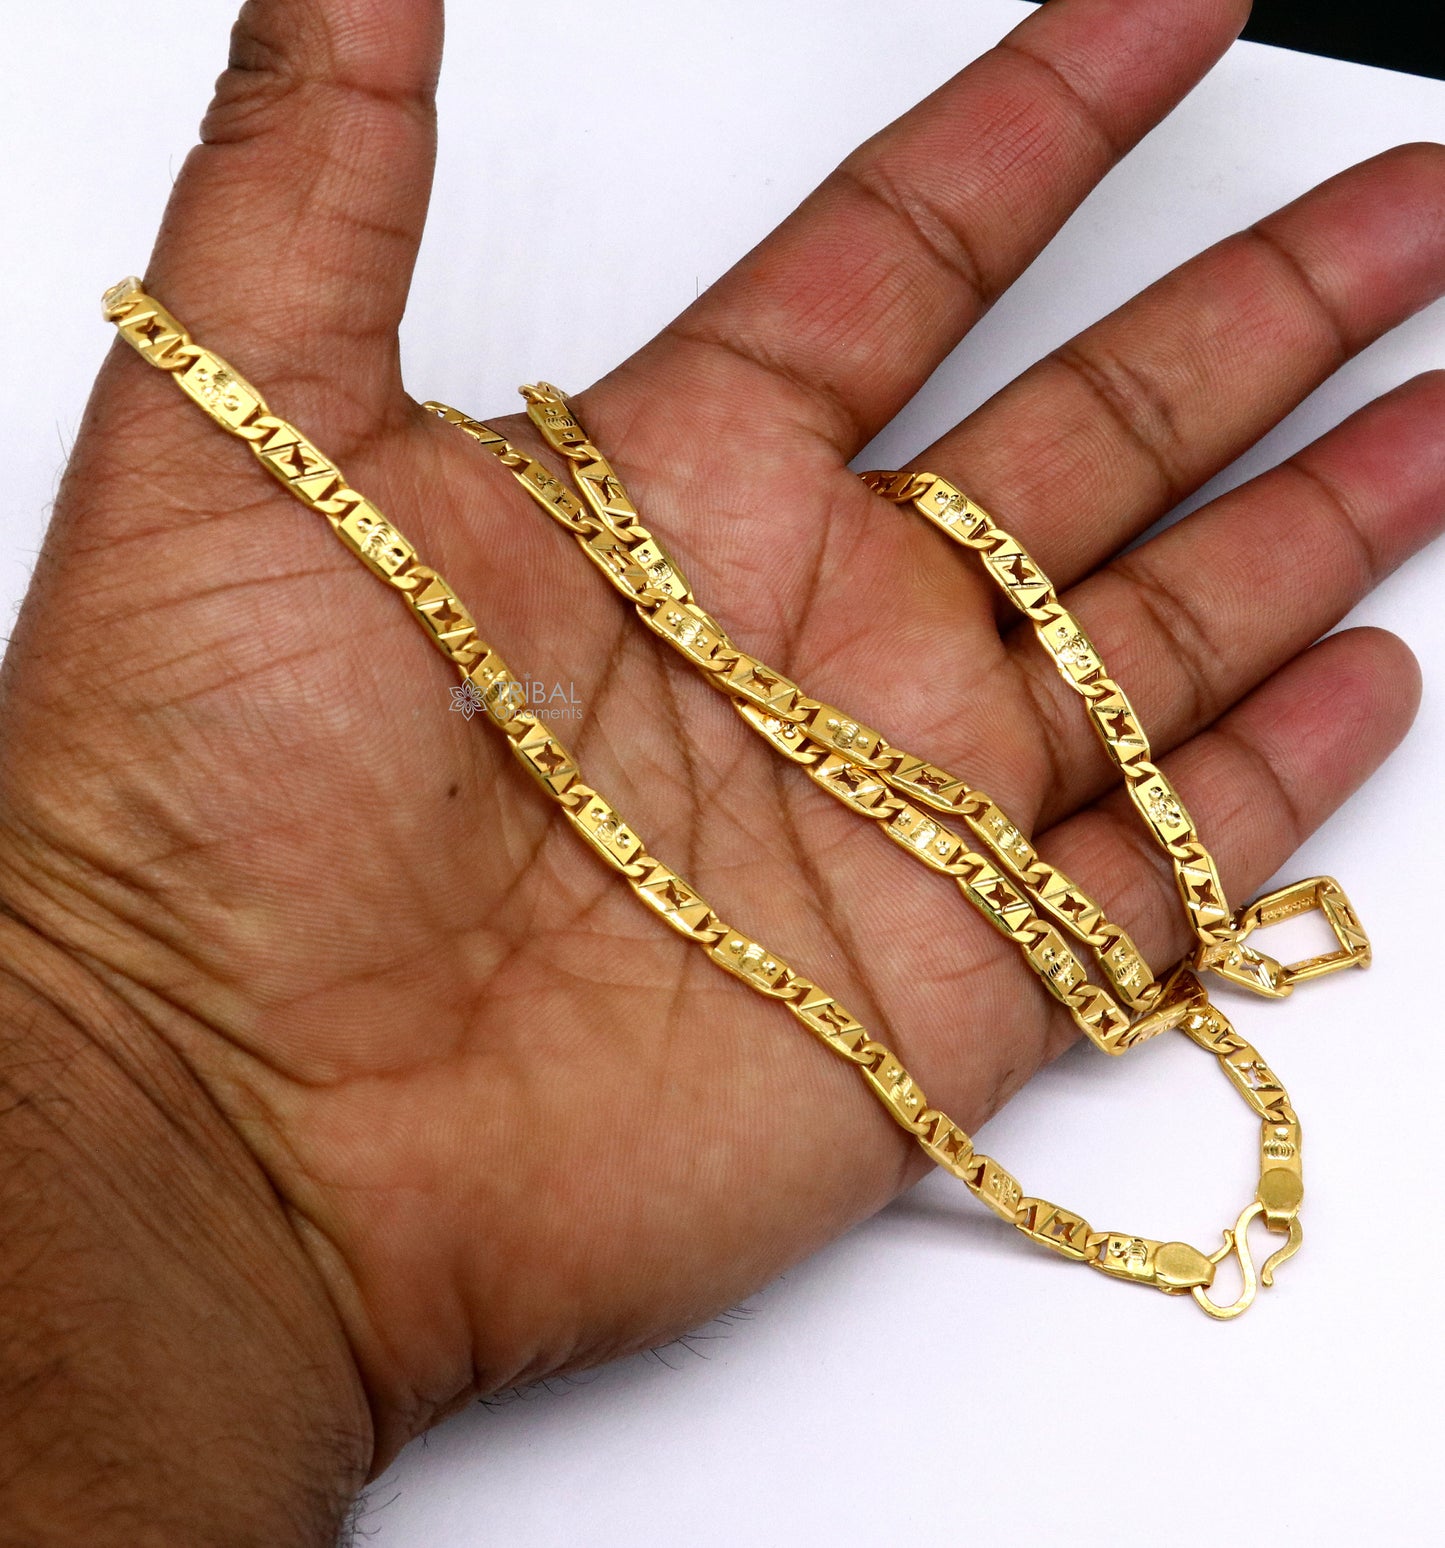 4mm all size Exclusive modern trendy 22kt yellow gold handmade nawabi chain best men's gifting chain necklace jewelry gch585 - TRIBAL ORNAMENTS